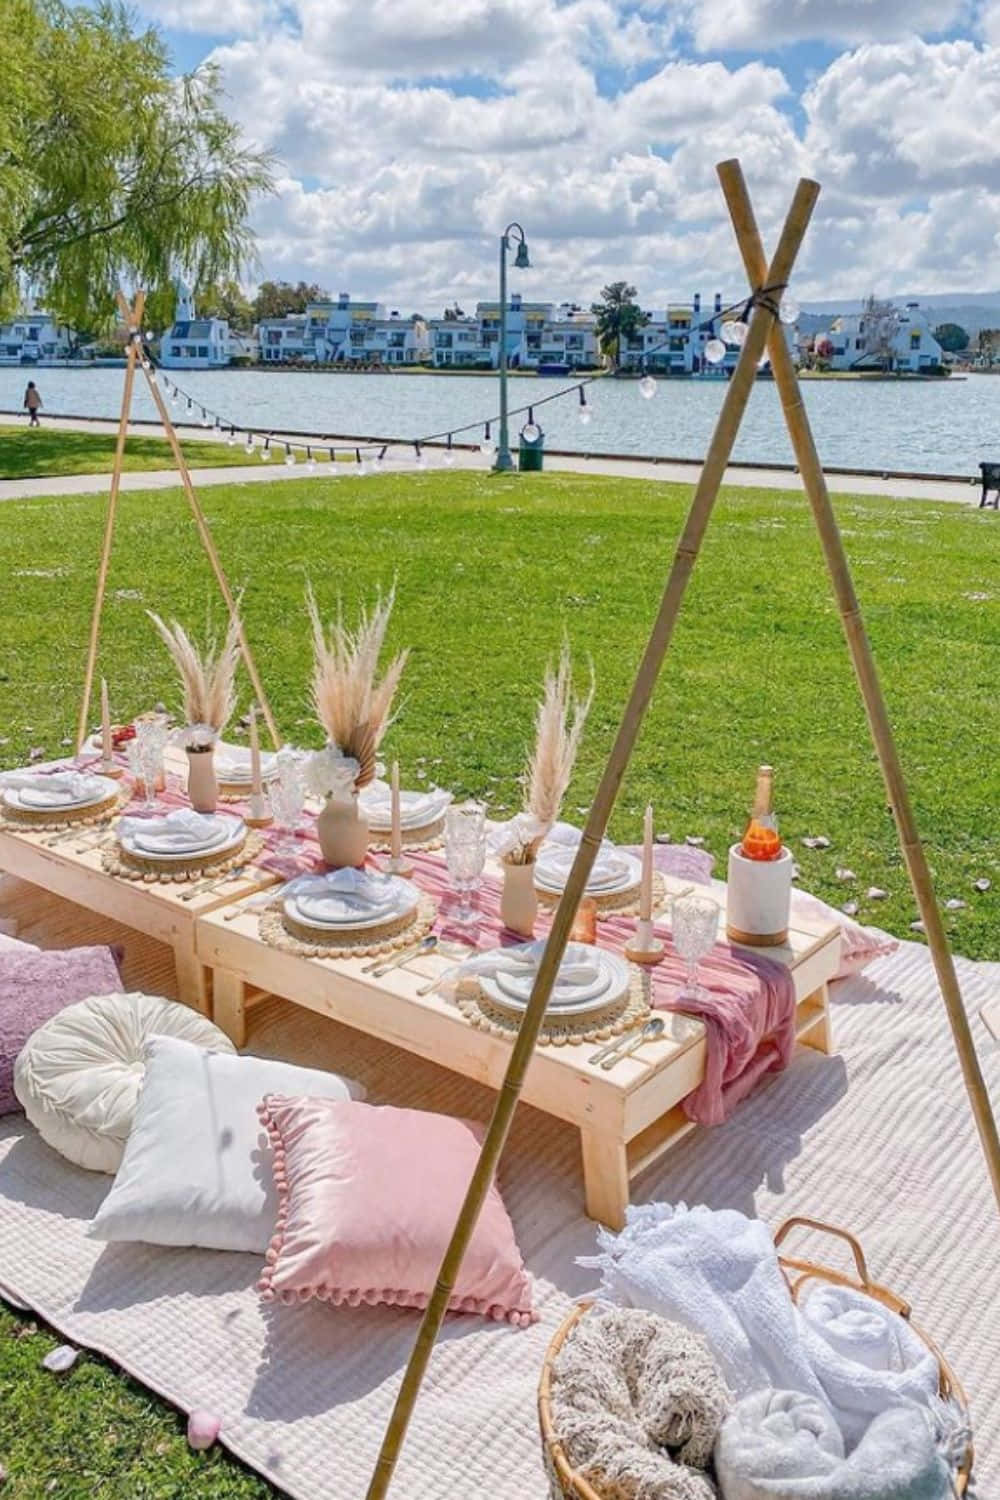 A Picnic Table Set Up In The Grass Near The Water